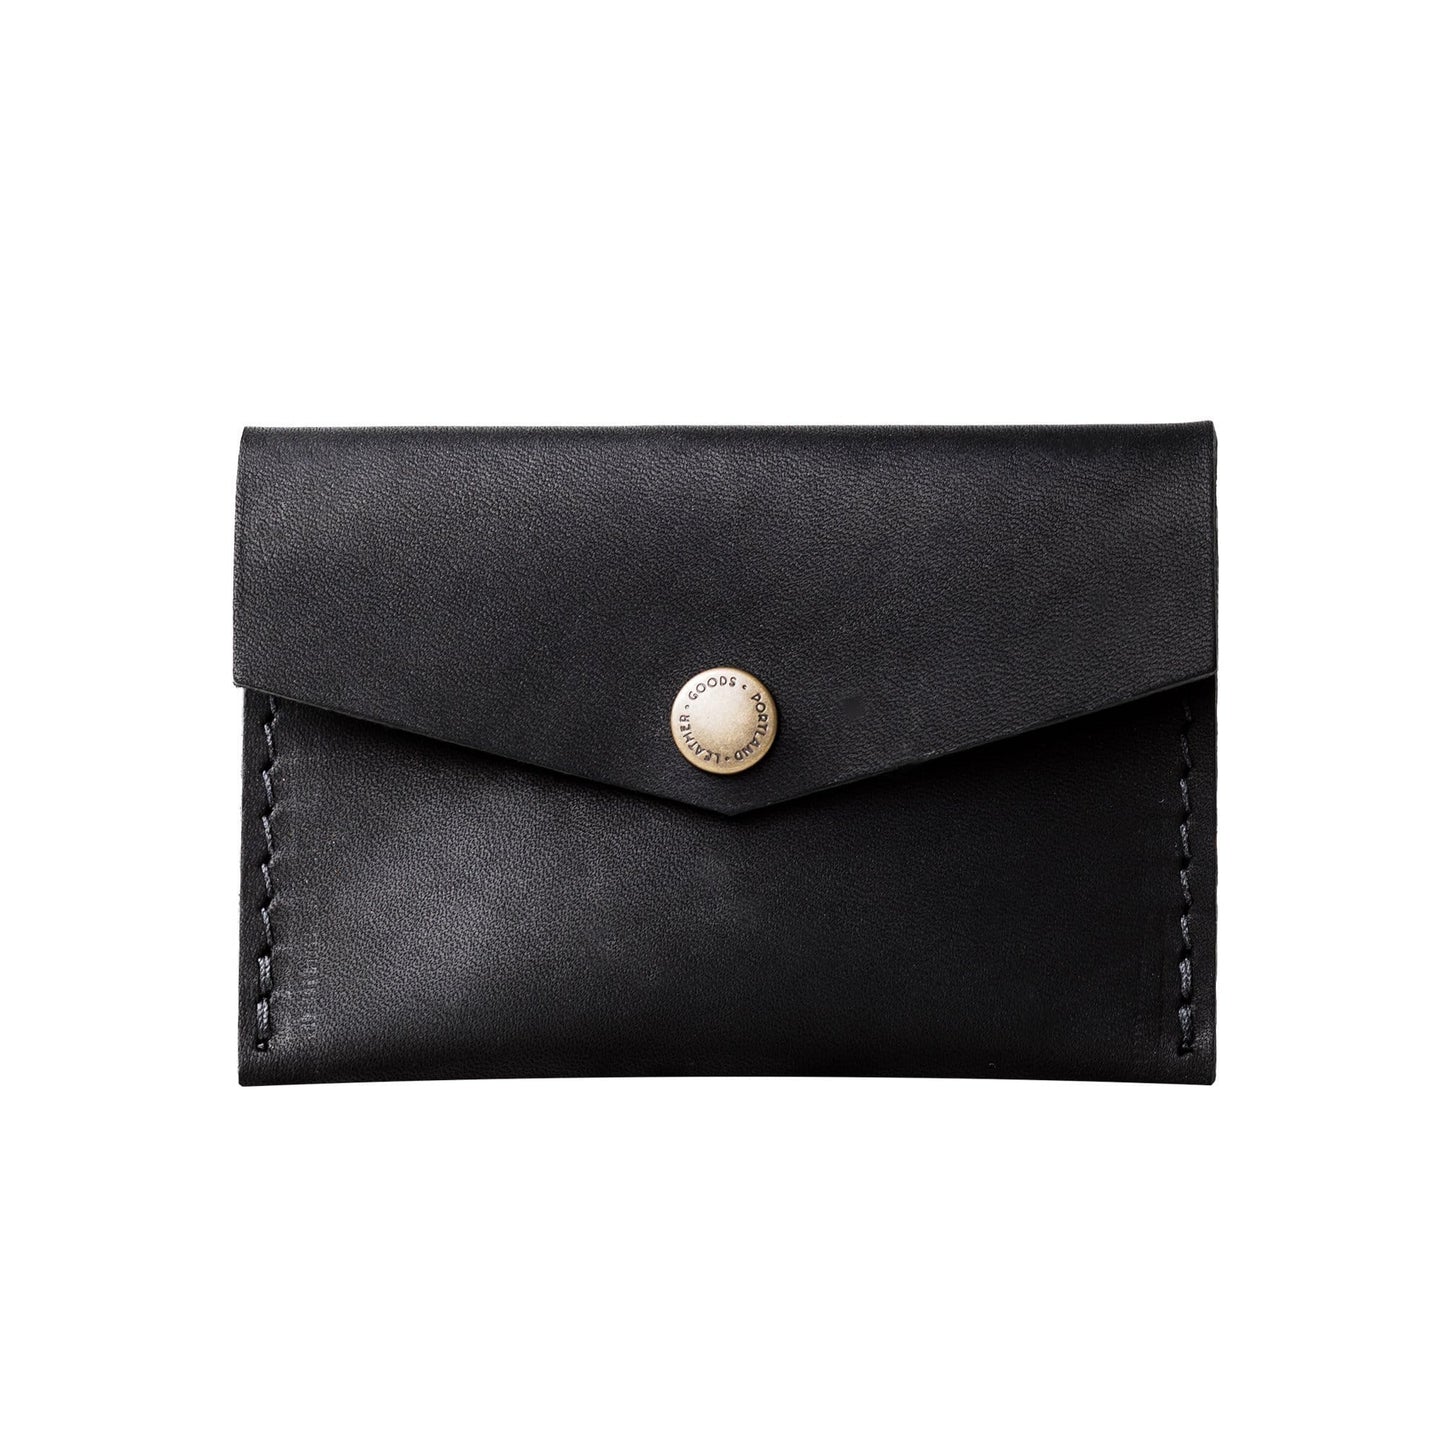 All Color: Black | leather handmade mini card wallet